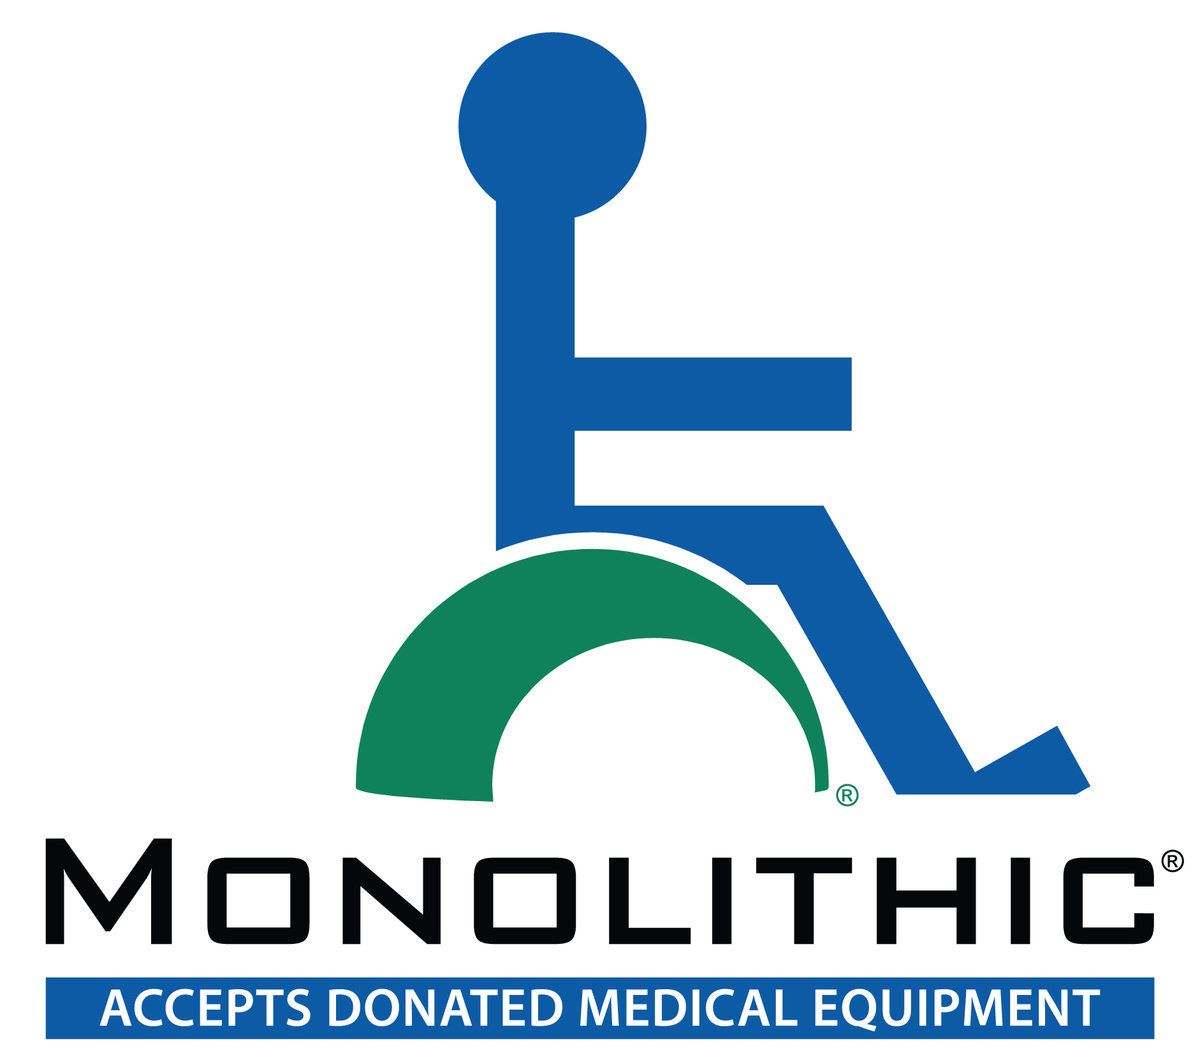 Image: Monolithic always accepts donated medical equipment. Please call 972-483-7423 if you have any new or used medical equipment you would like to give to someone in need. David South can have someone pick up the donated items or you can bring it to Monolithic at 177 Dome Park Place, Italy.